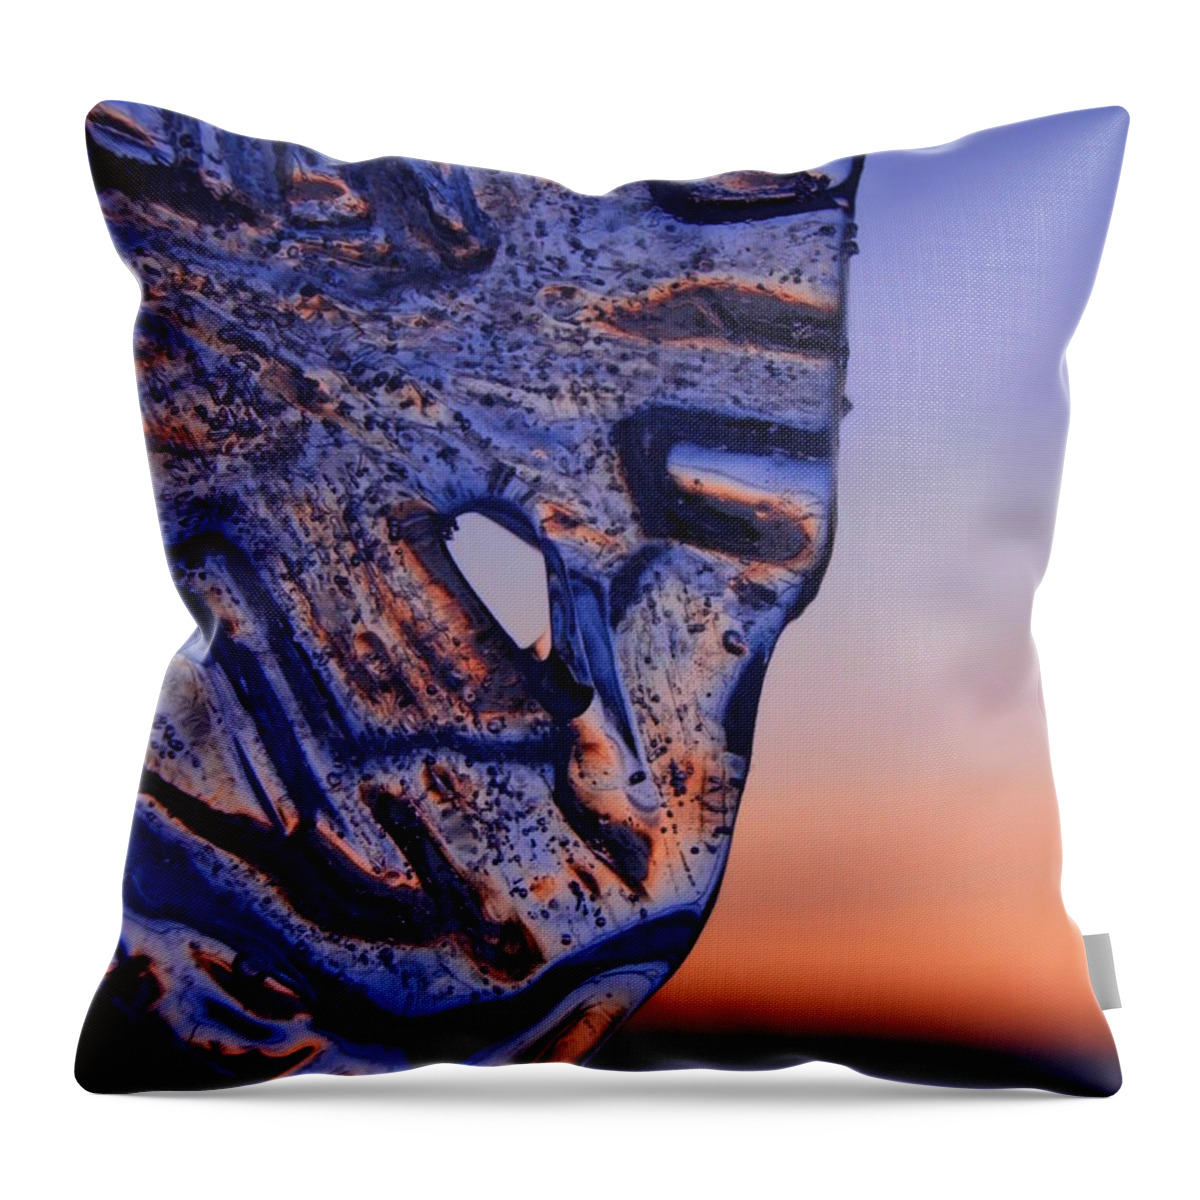 Enjoying Sunset Throw Pillow featuring the photograph Ice Lord by Sami Tiainen